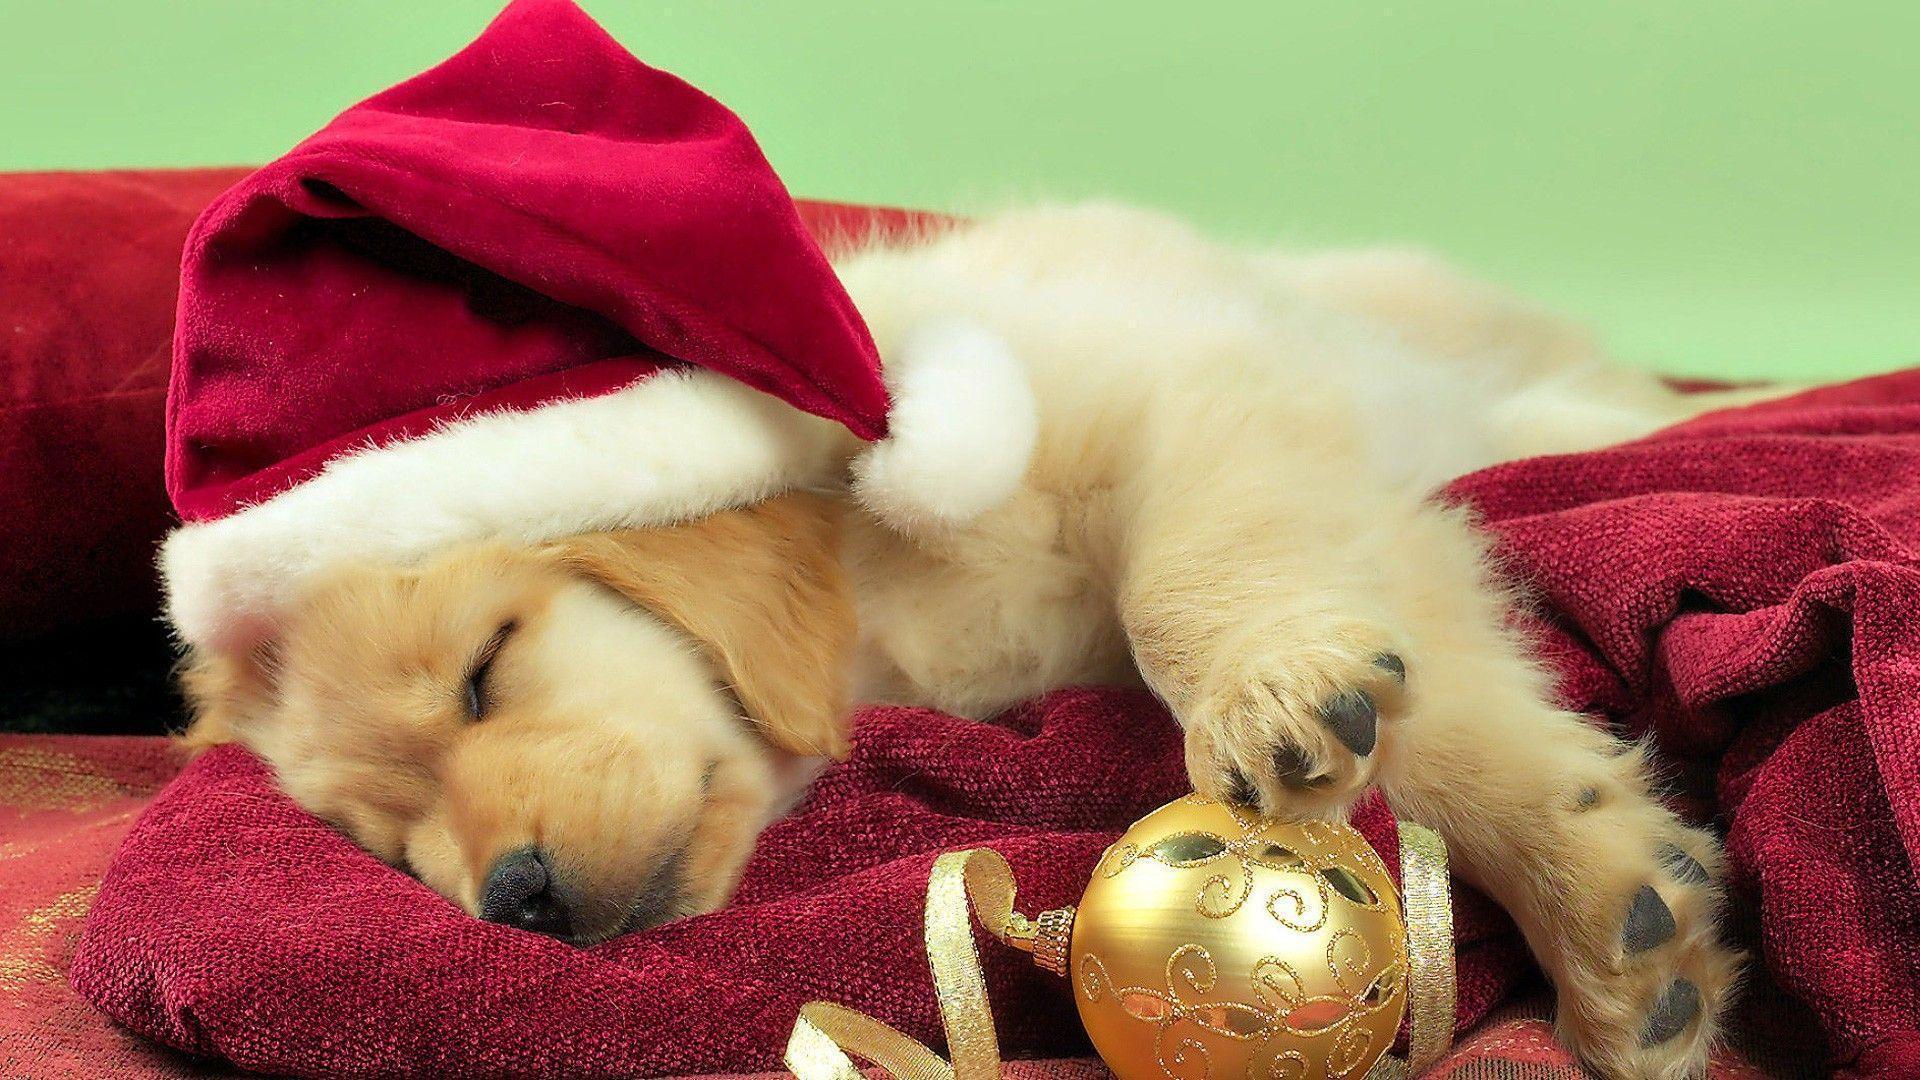 Cute Puppy In Christmas Hat iPhone 6 Wallpaper Download  iPhone Wallpapers  iPad wallpapers Onestop Download  Christmas puppy Puppy wallpaper  Christmas dog